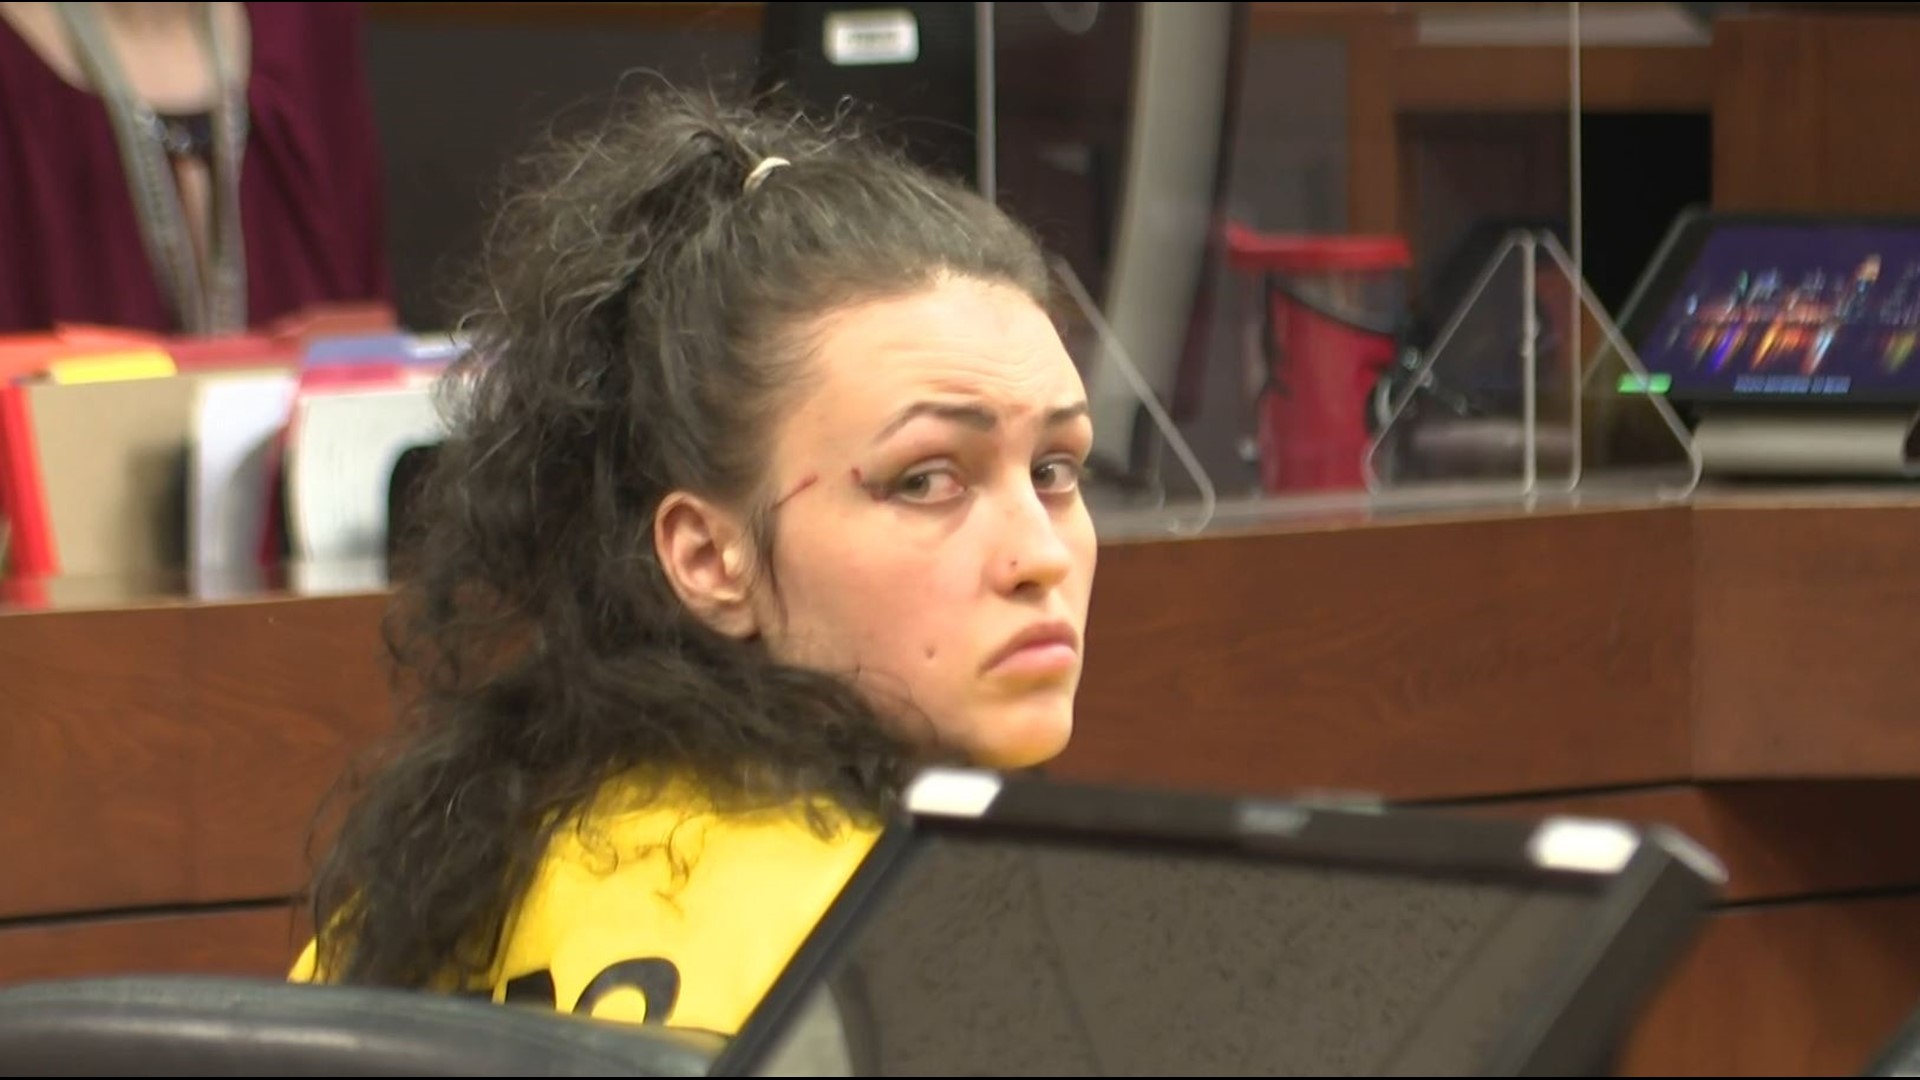 Kaitlynn Higgins admitted to cutting out her son Kyan Higgin Jr.'s tongue, shooting him, and placing his body in the trunk of her car.